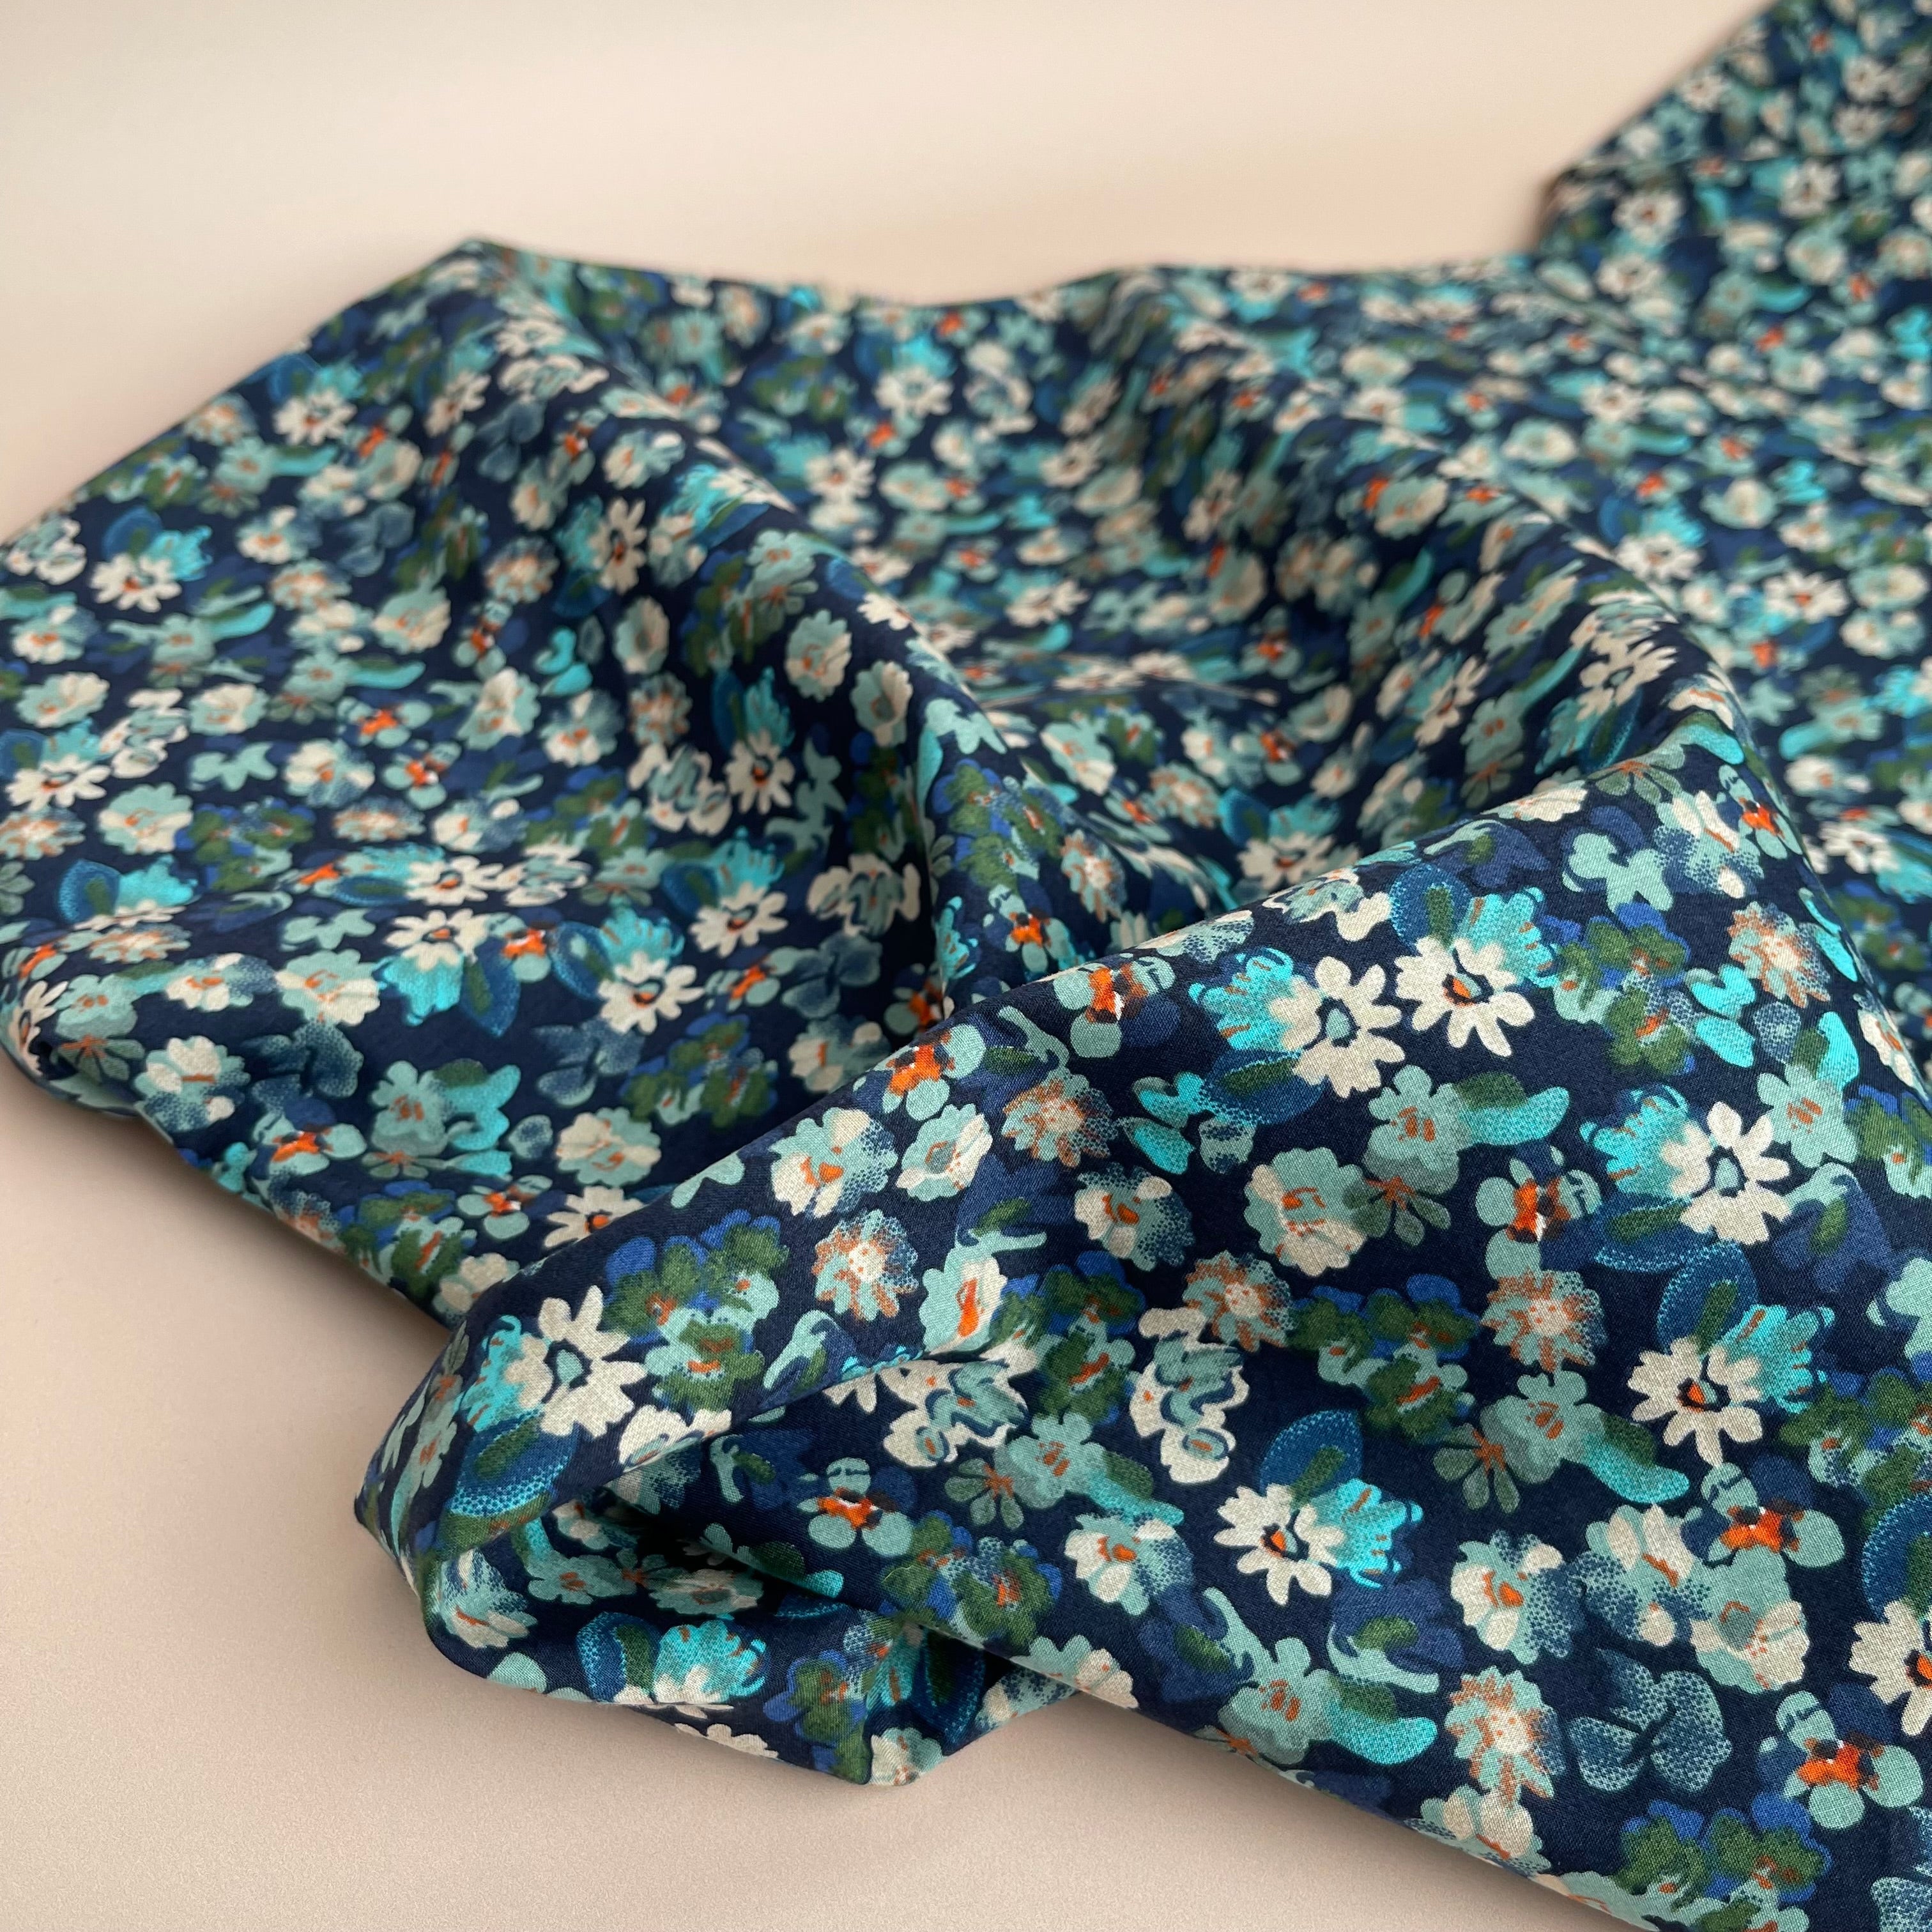 REMNANT 1 Metre - Meadow Blue on Navy Cotton Lawn Fabric